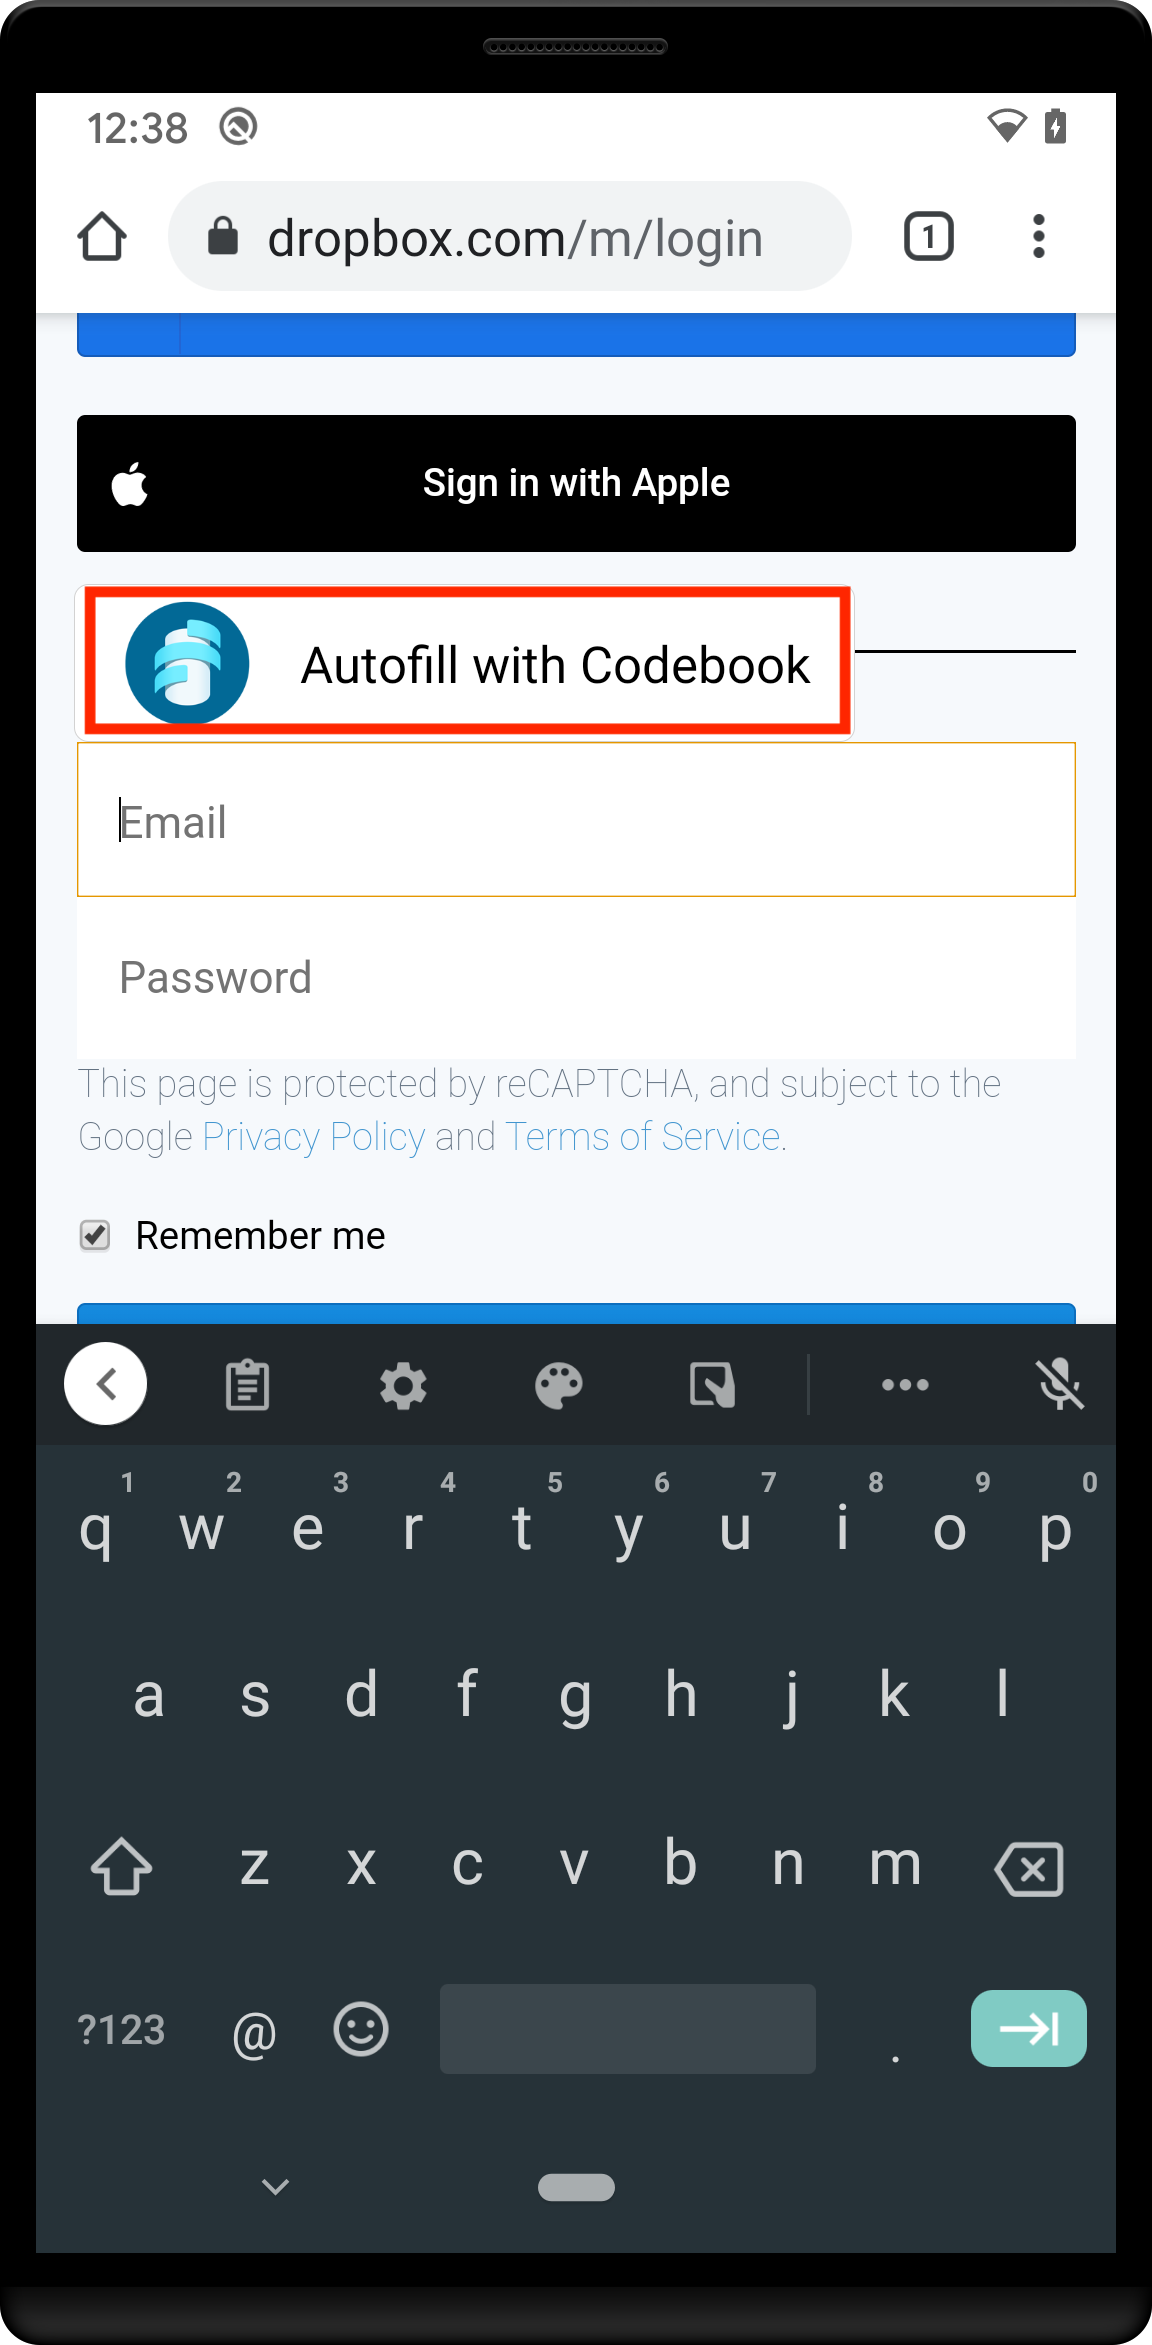 Sign In form on dropbox.com with Autofill for Codebook dialog displayed.